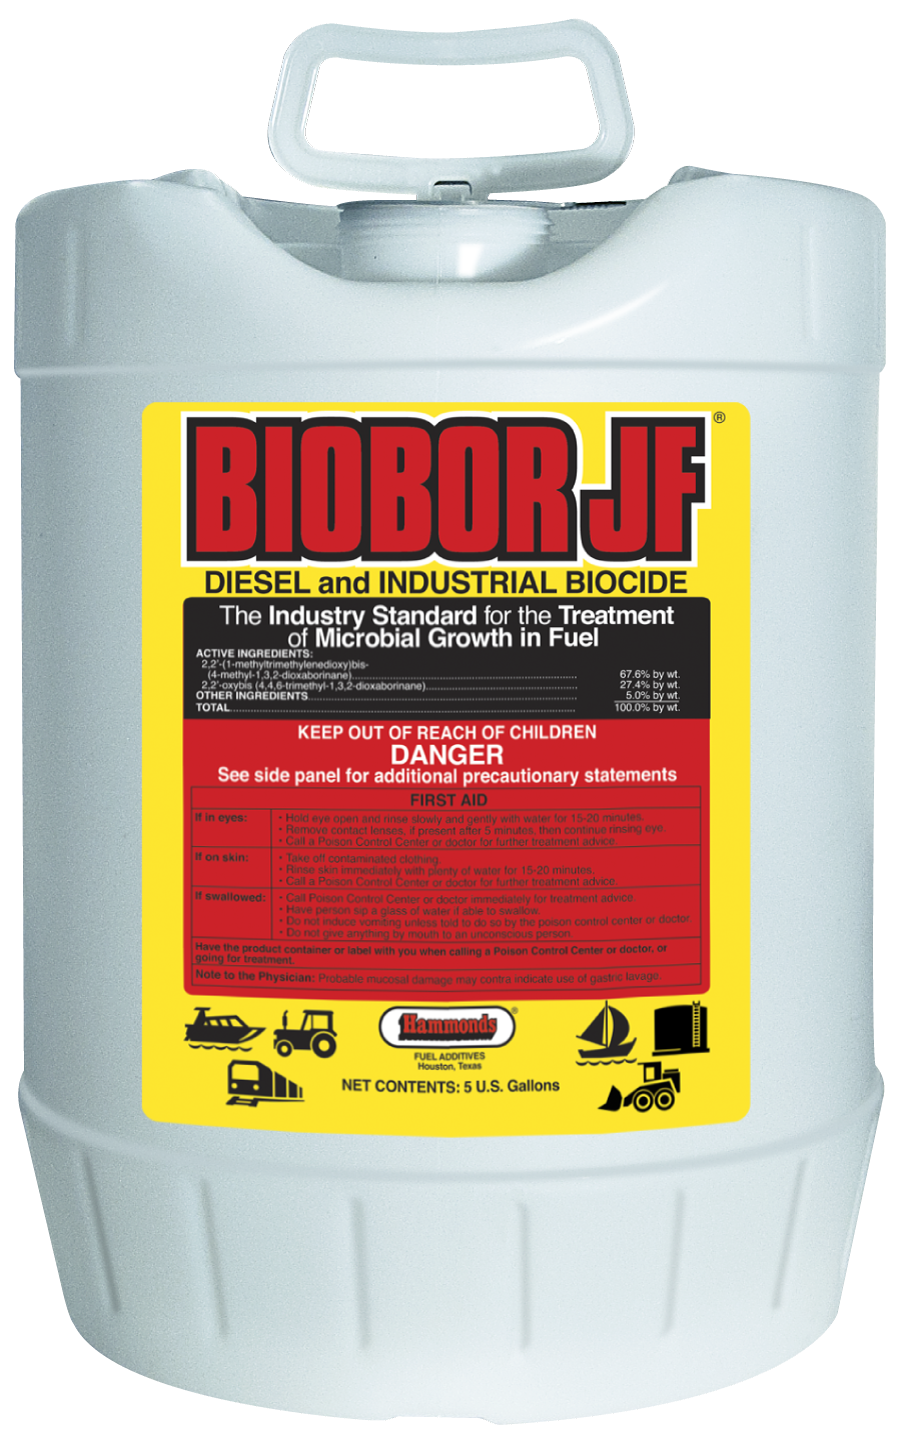 Biobor JF 5 gal. Diesel Biocide and Lubricity Additive